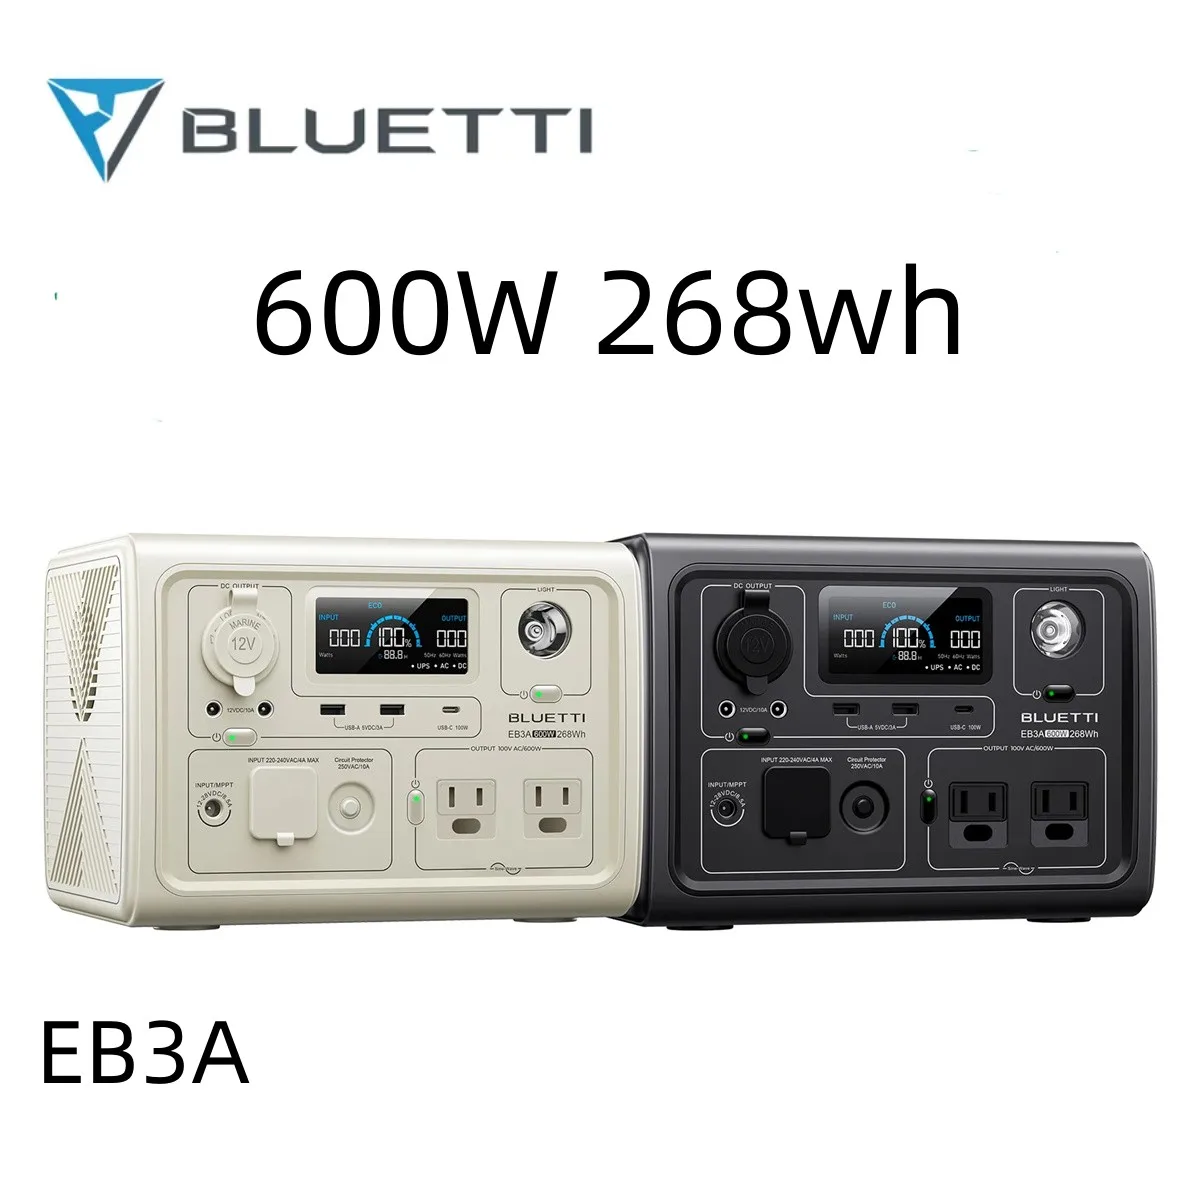 New-BLUETTI-EB3A-600W-268Wh-Portable-Power-Station-LiFePO4-Battery-Backup-Free-Energy-Power-generator-For.jpg